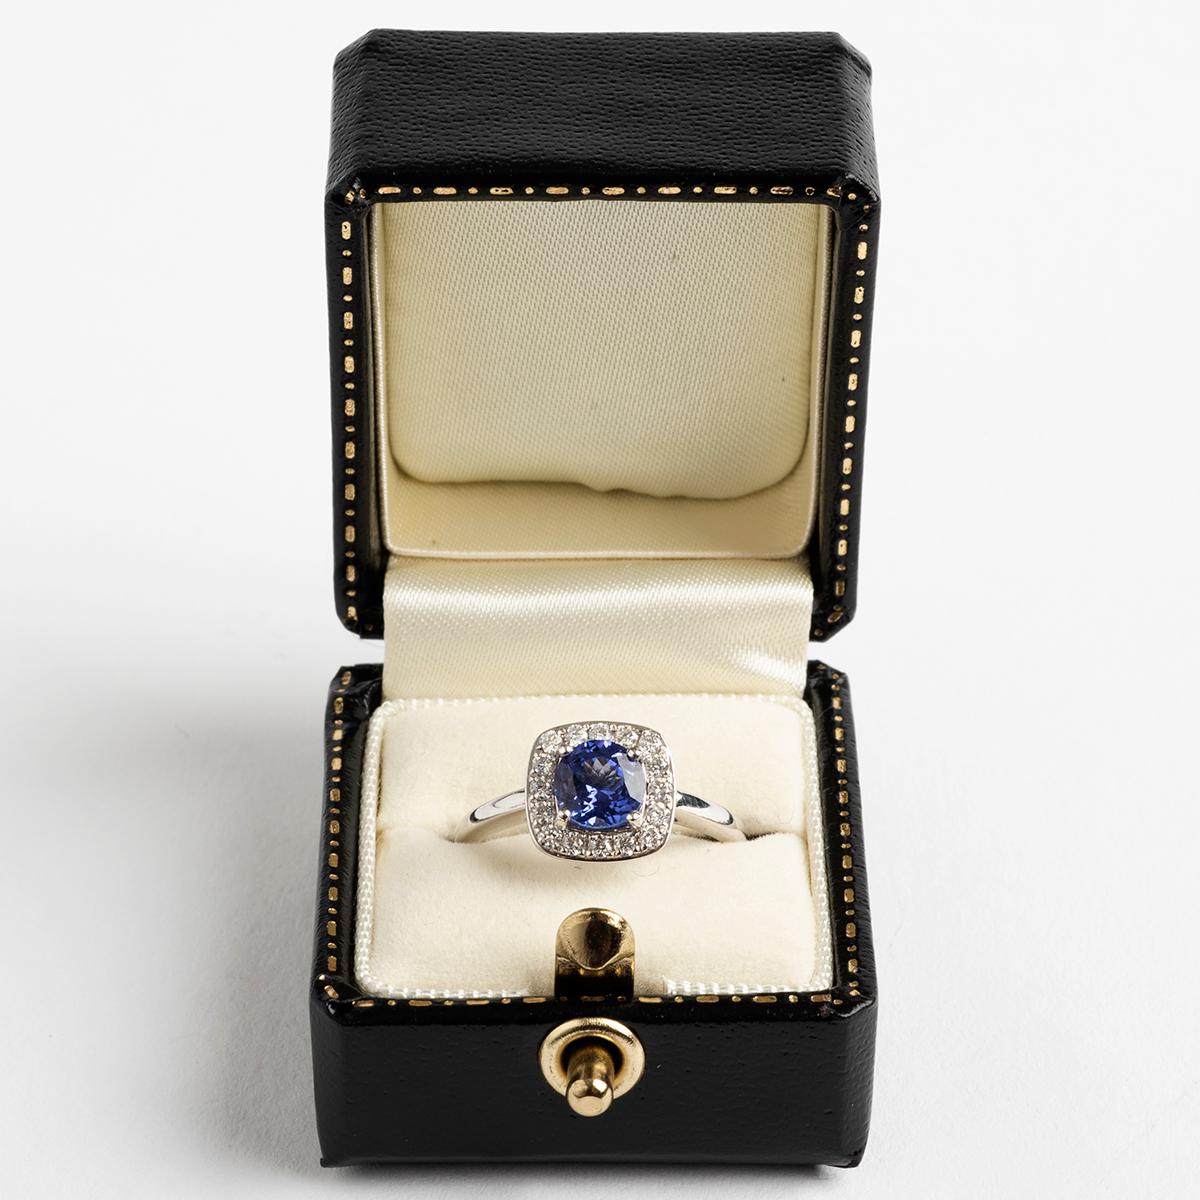 
Our beautiful modern cluster 18k white gold ring features a round tanzanite (est. 78carat) and diamonds (est. .23carat). The band is hallmarked London, 2015 and is ring size M.

A unique piece within our carefully curated Vintage & Prestige fine